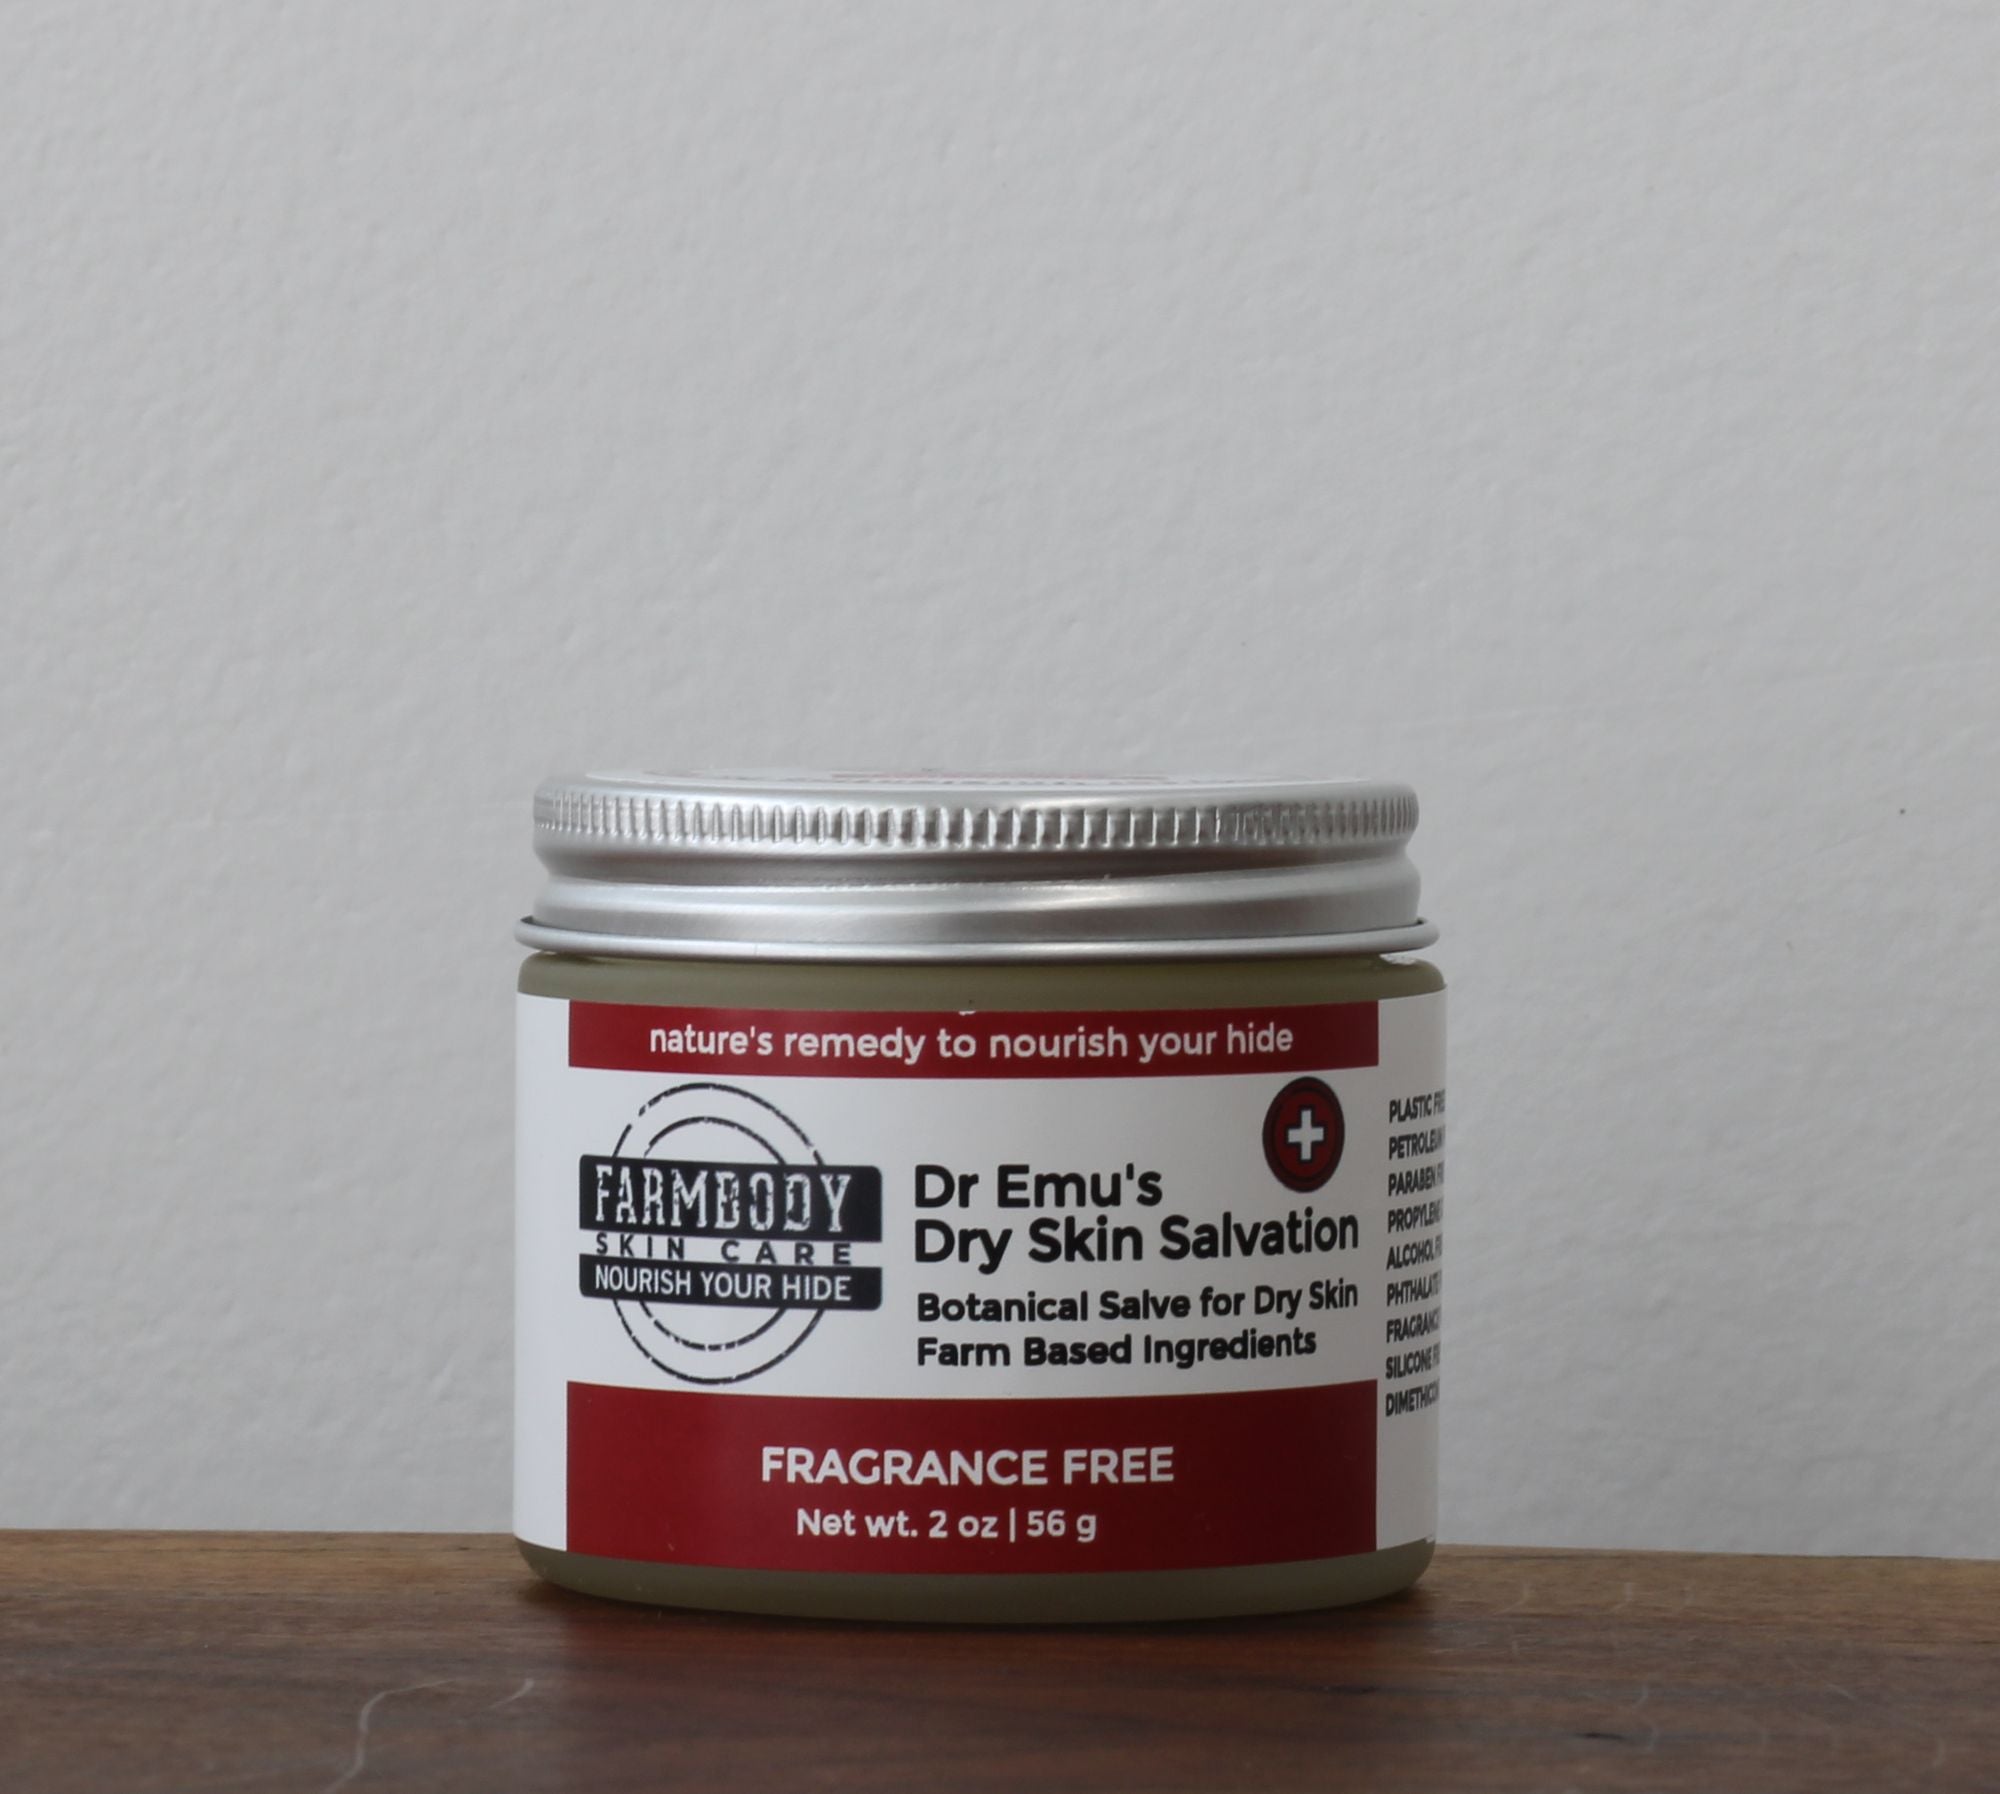 Dr Emu's Dry Skin Salvation Salve for Dry skin with emu oil and tallow